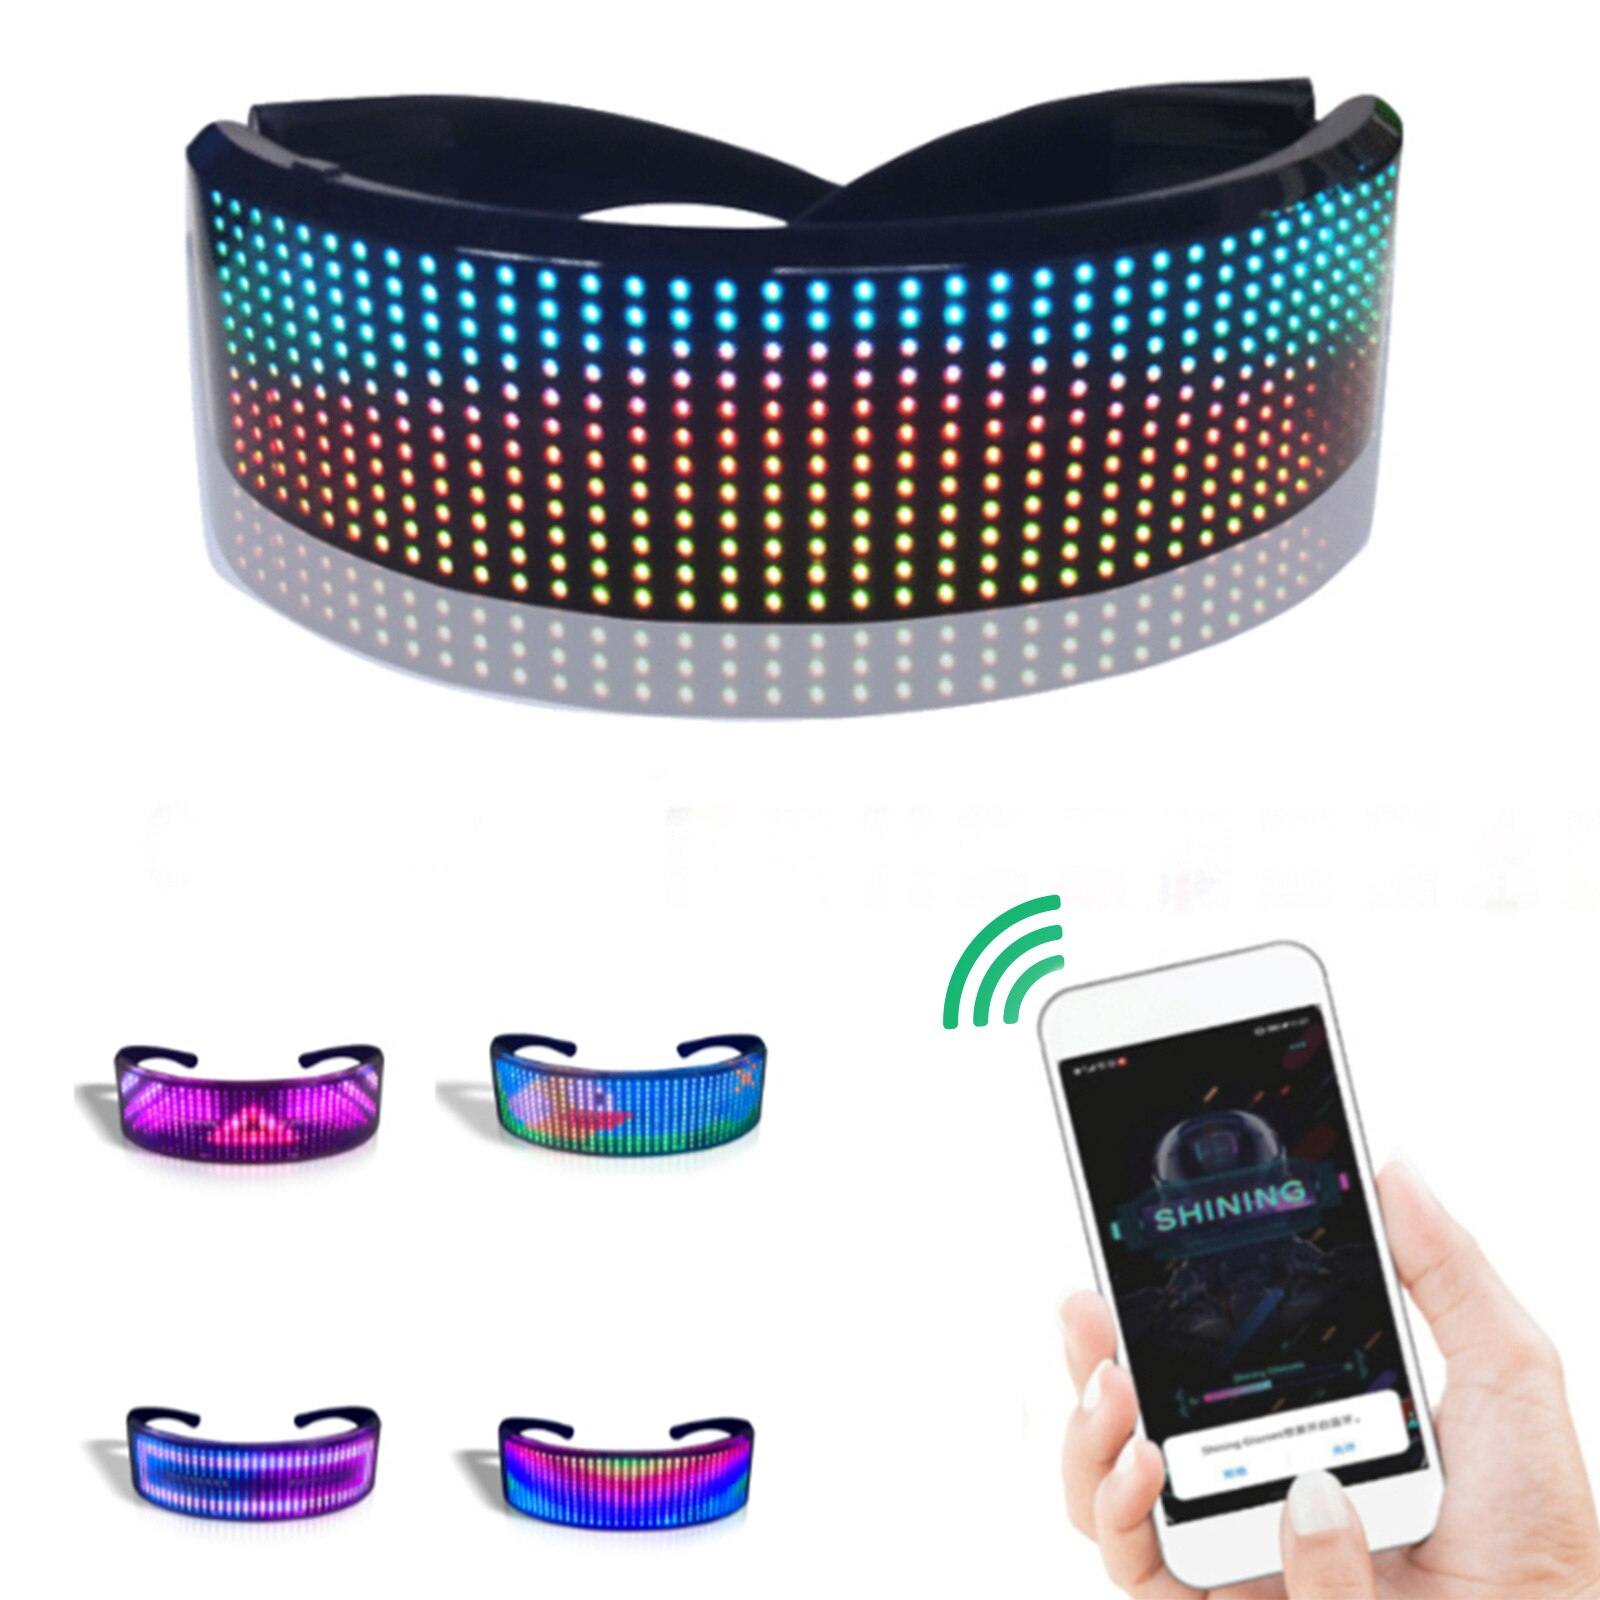 LED Light Party Glasses with Customizable Animations